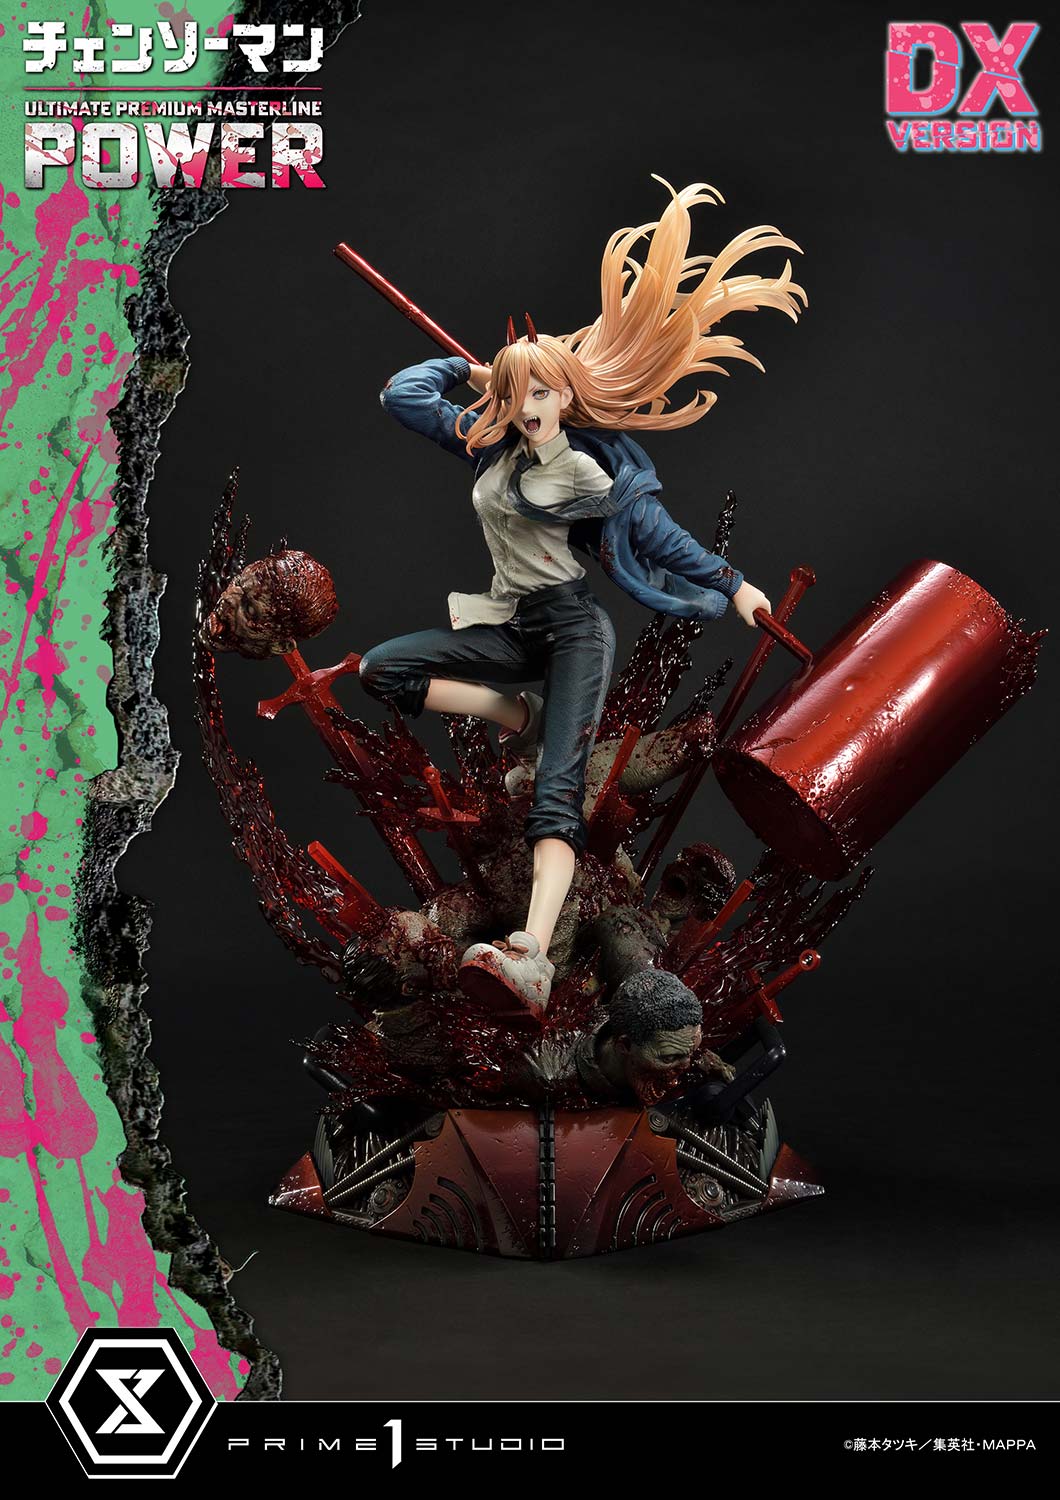 [Made-To-Order]Ultimate Premium Masterline "Chainsaw Man" Power DX Edition